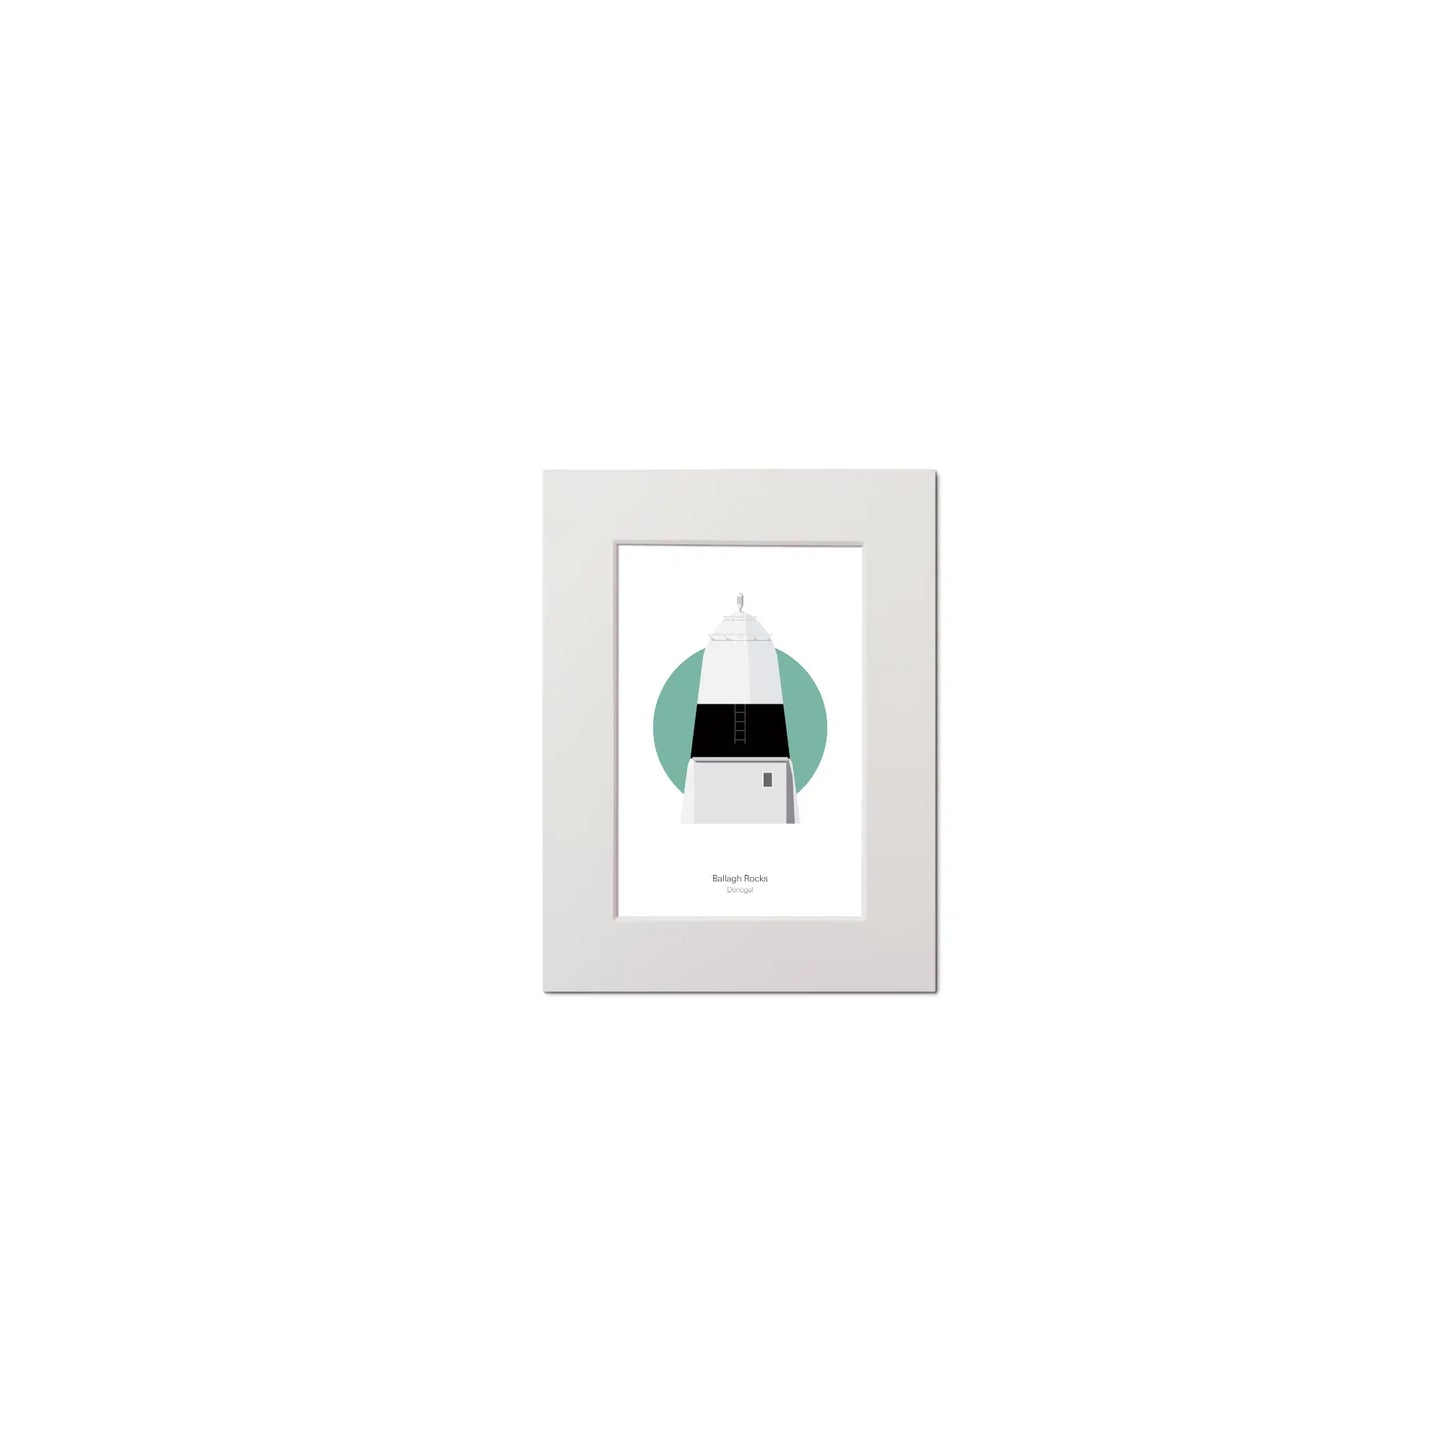 Contemporary graphic illustration of Ballagh Rocks lighthouse on a white background inside light blue square, mounted and measuring 15x20cm.